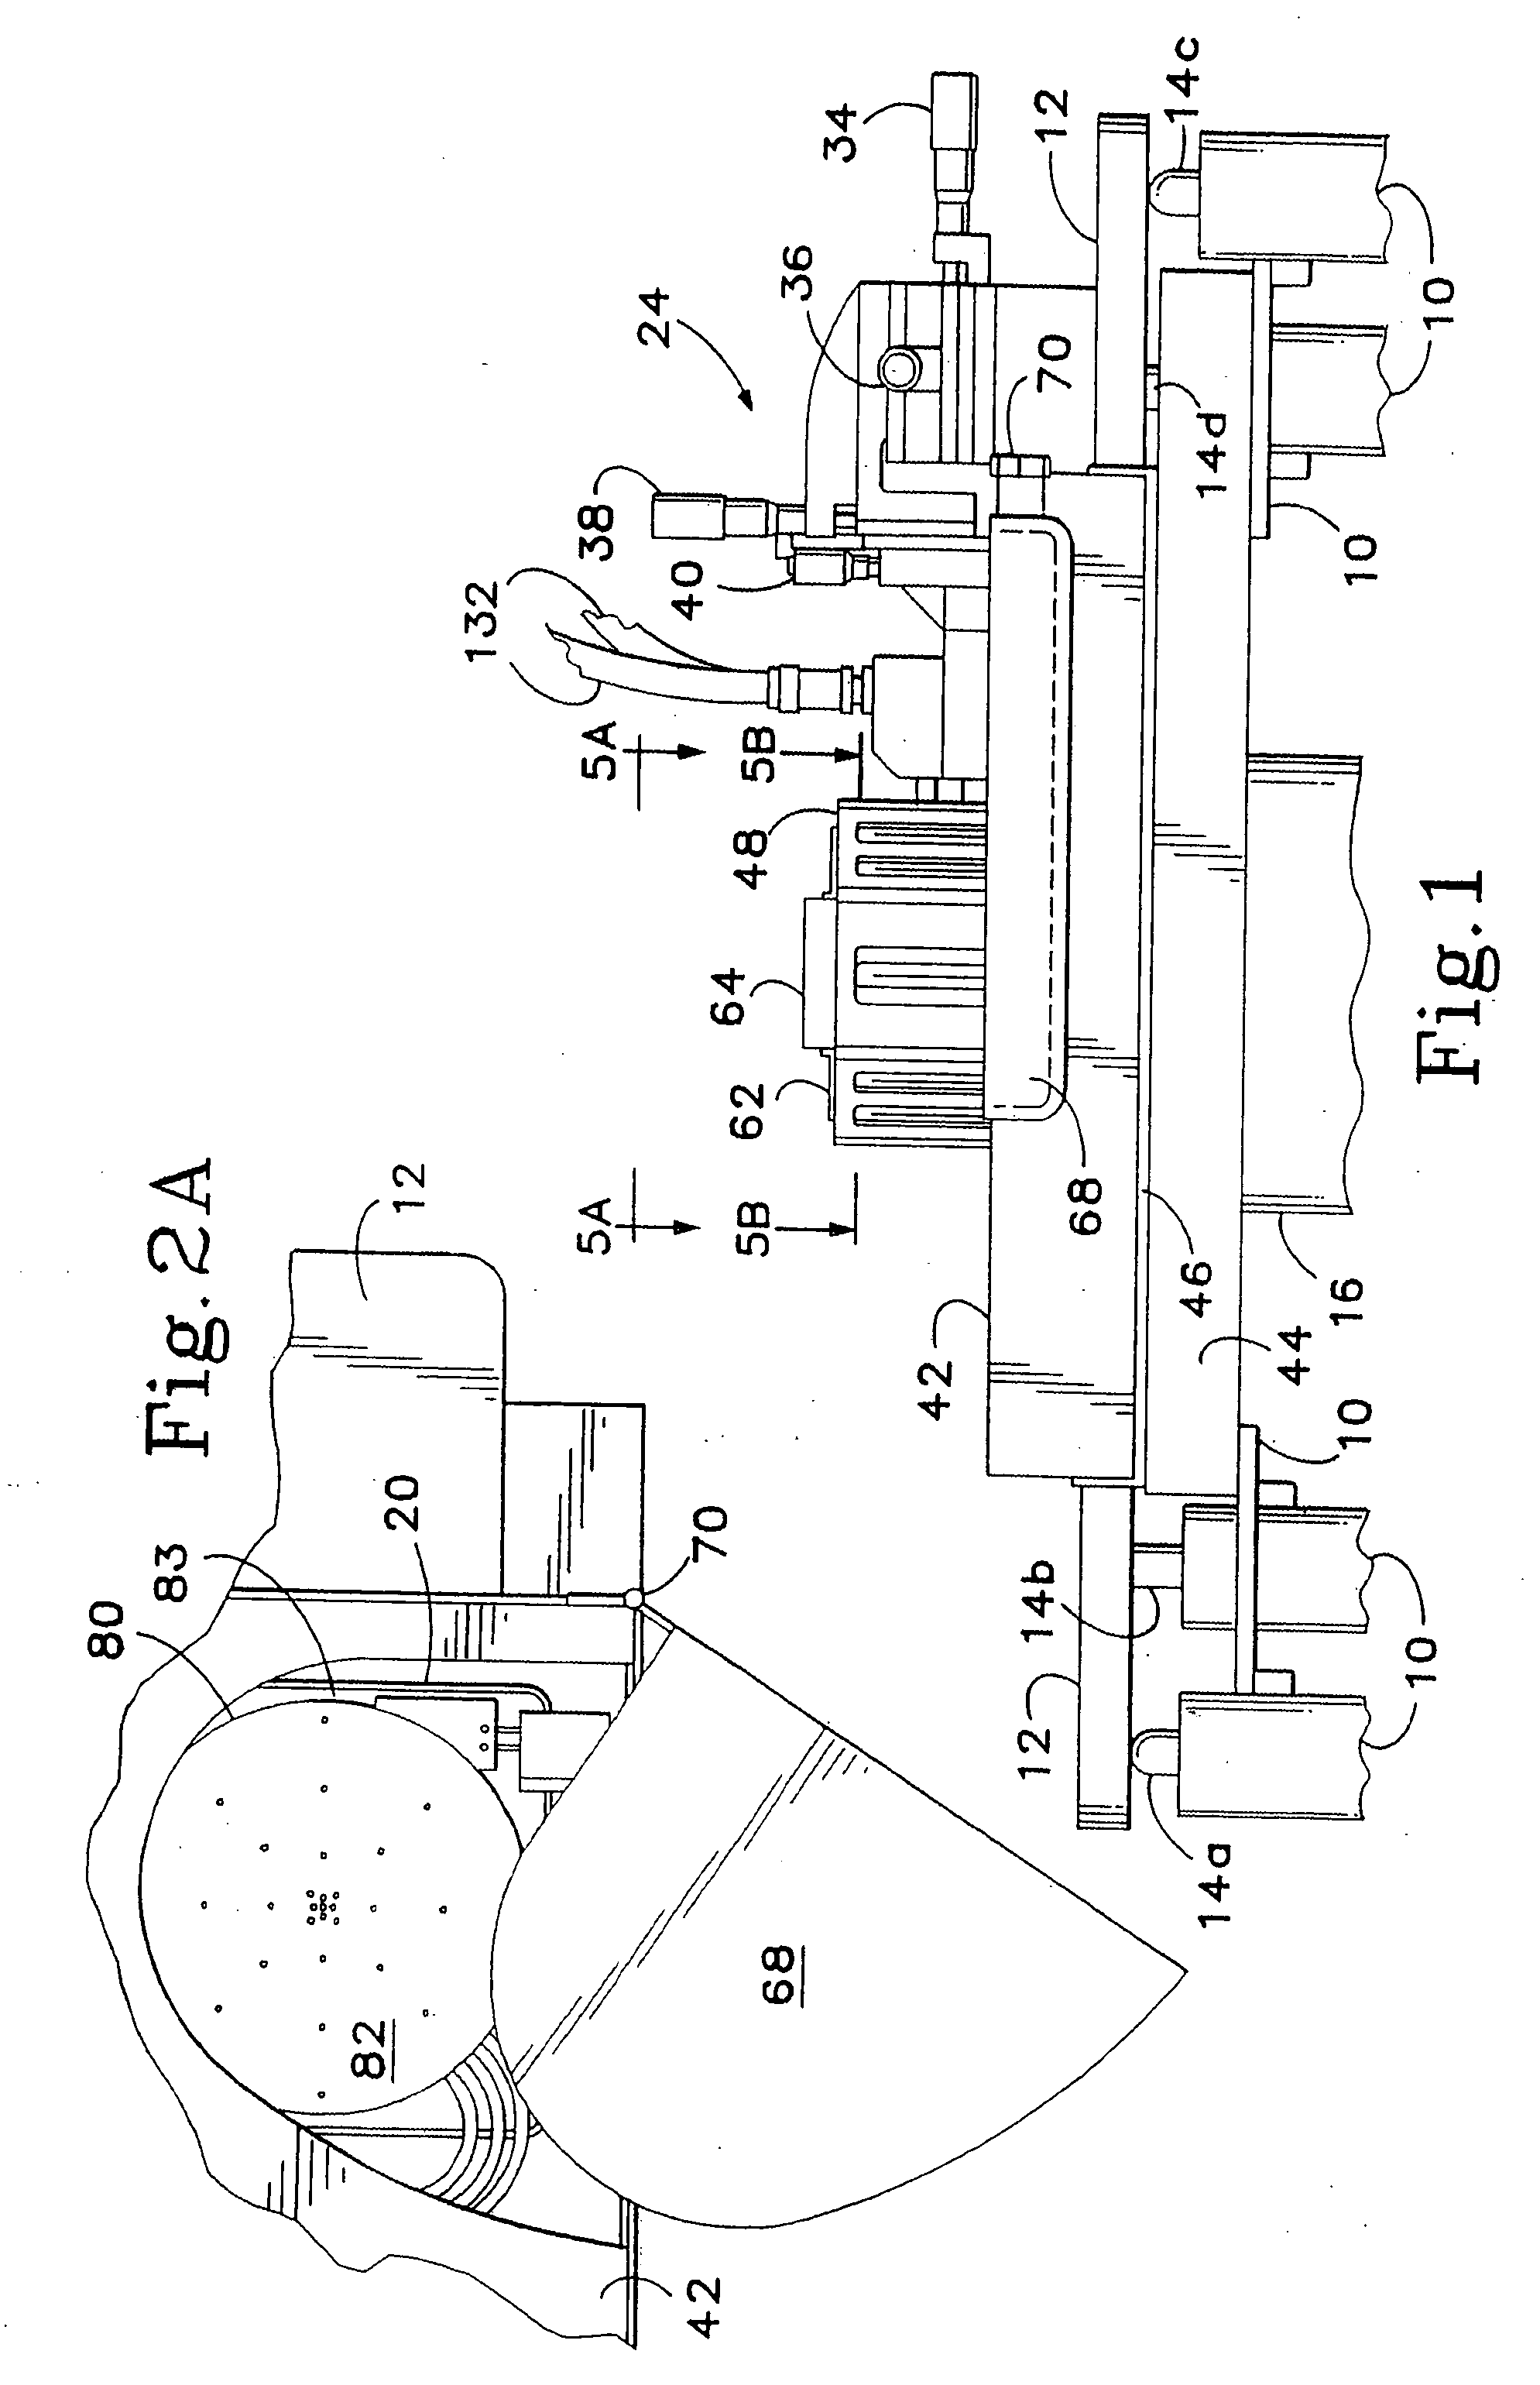 Wafer probe station having a skirting component